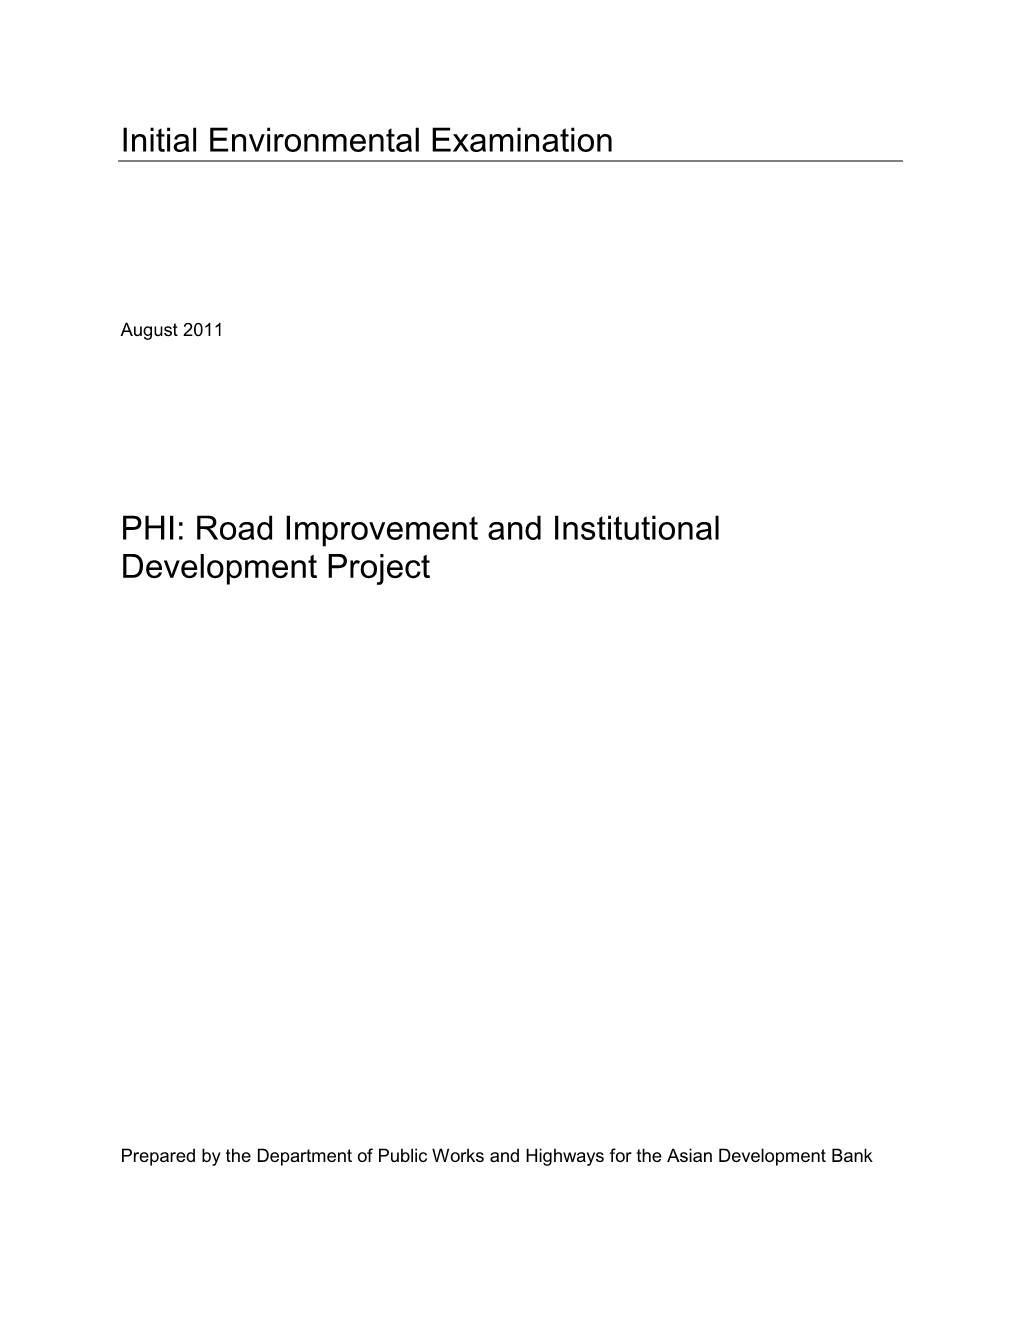 IEE: Philippines: Road Improvement and Institutional Development Project